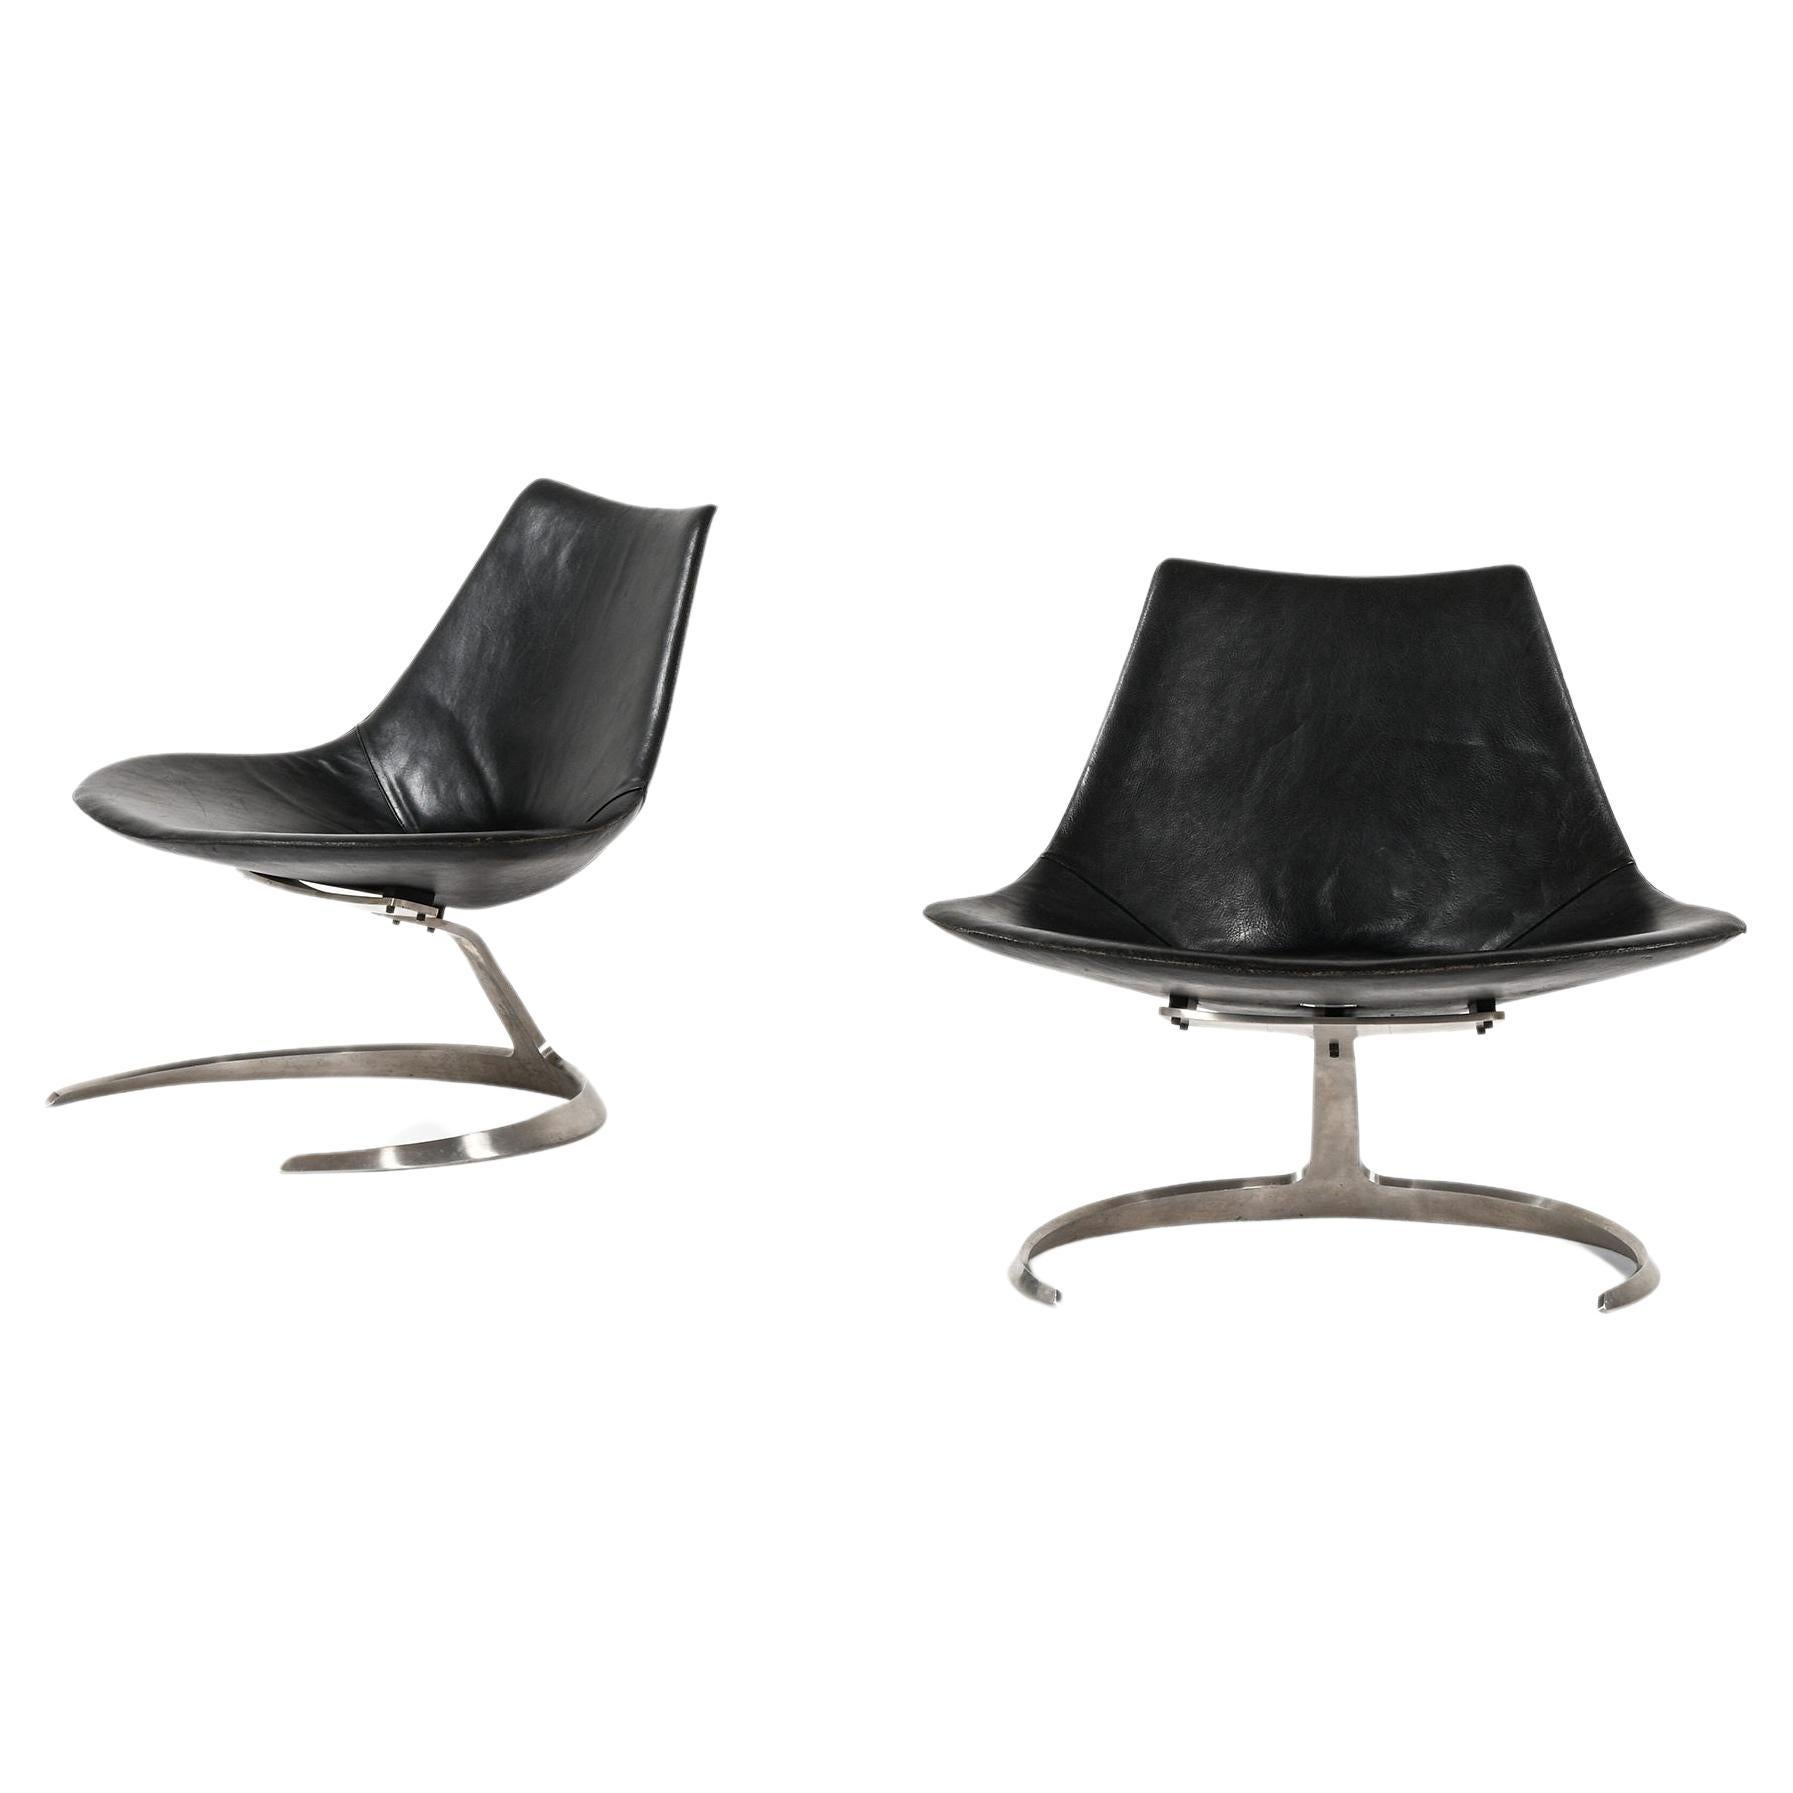 Preben Fabricius & Jørgen Kastholm Scimitar easy chairs Steel and Leather, 1960s